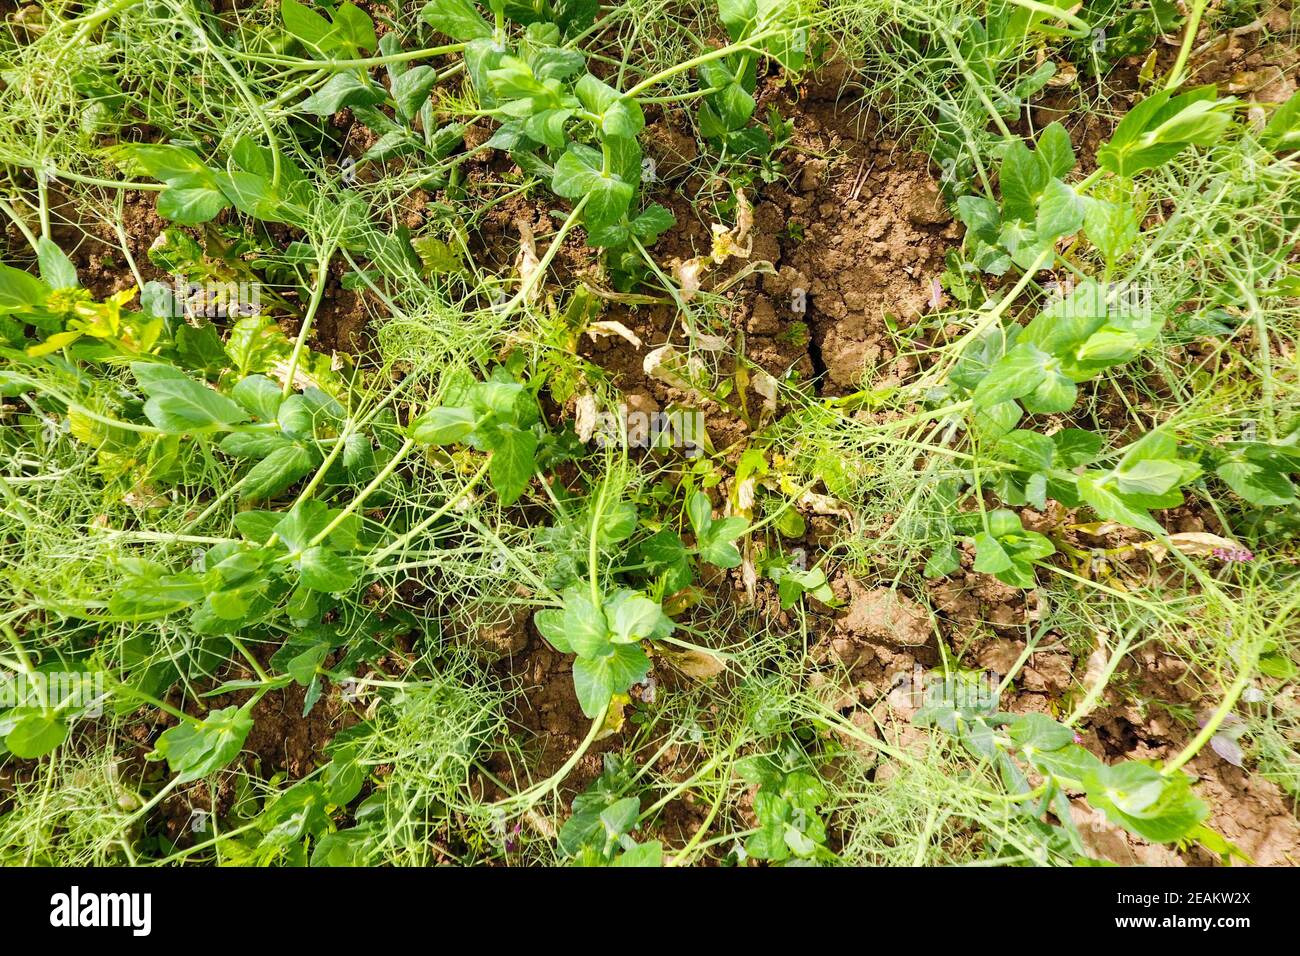 Field of young peas. Peas on the field is growing. Legumes in the field Stock Photo